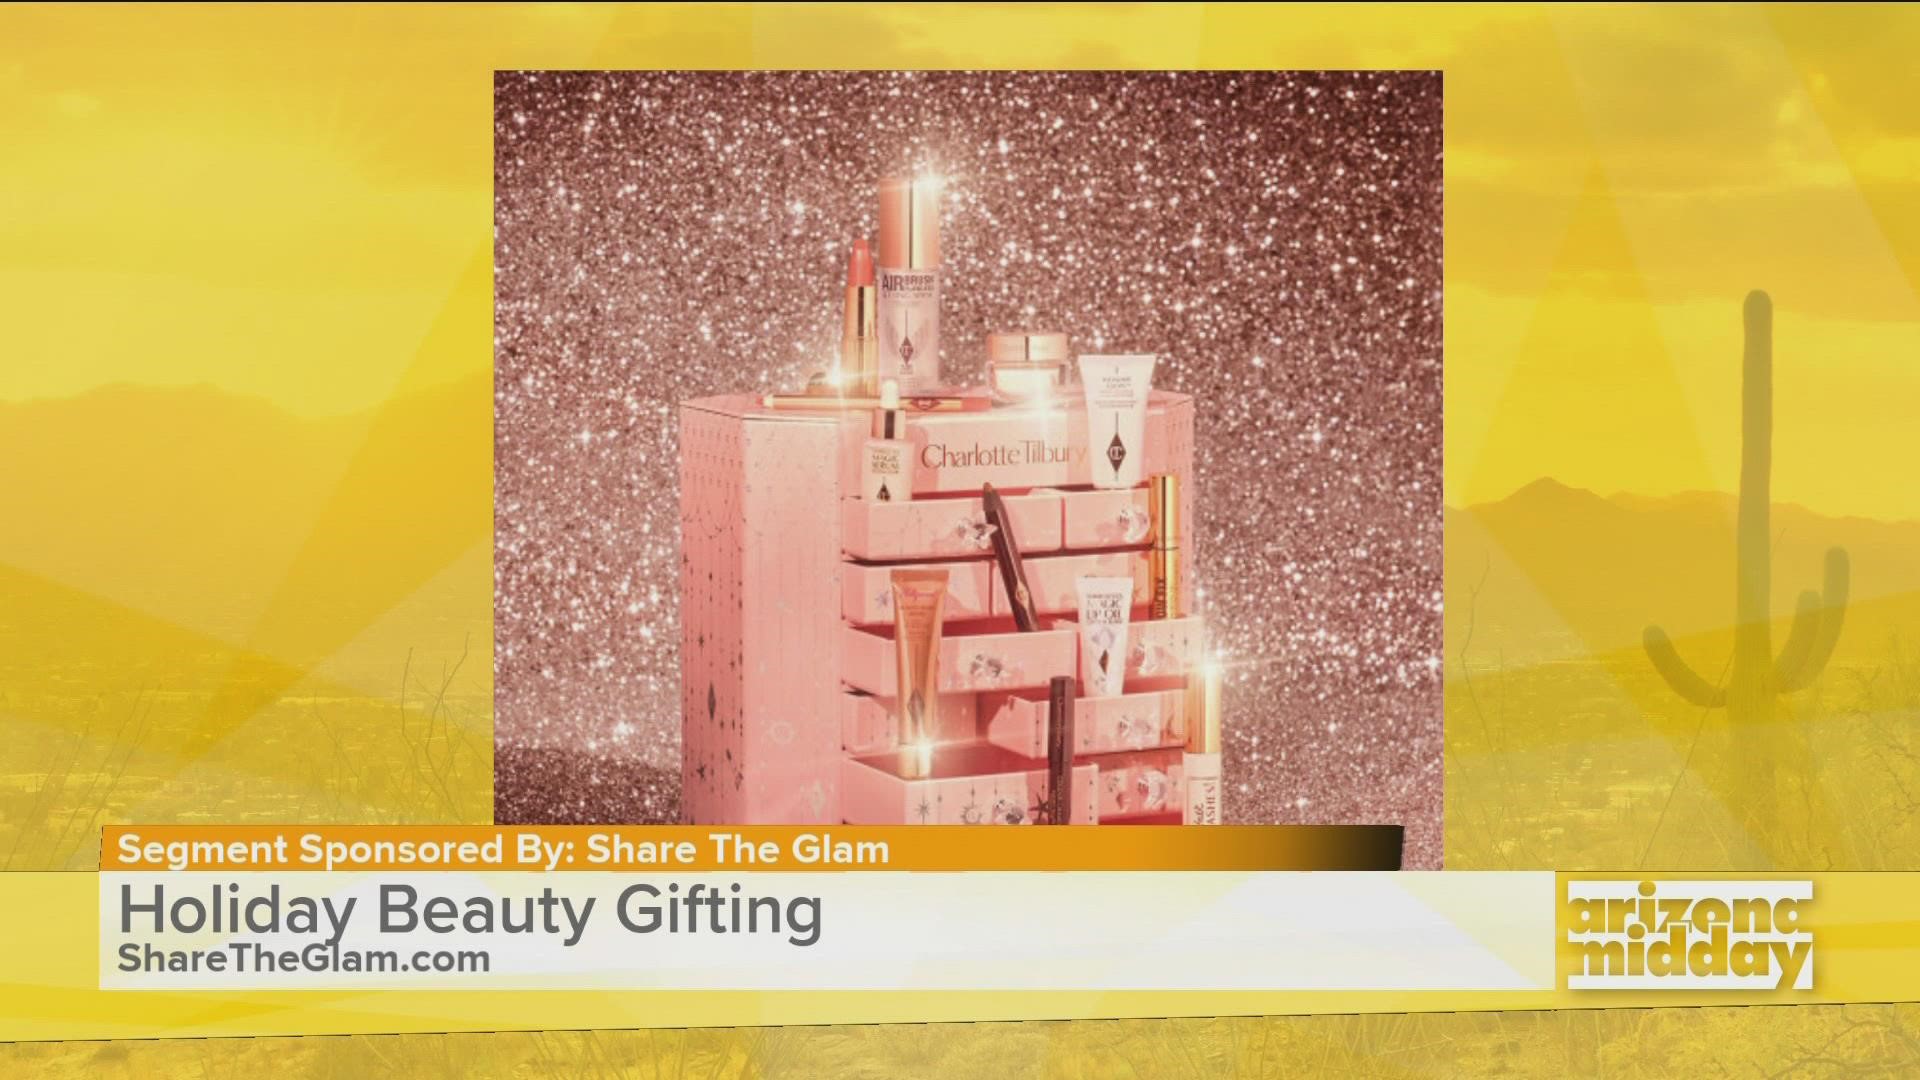 Mickey Williams with Share The Glam shows us her top picks for beauty and makeup lovers this holiday season!